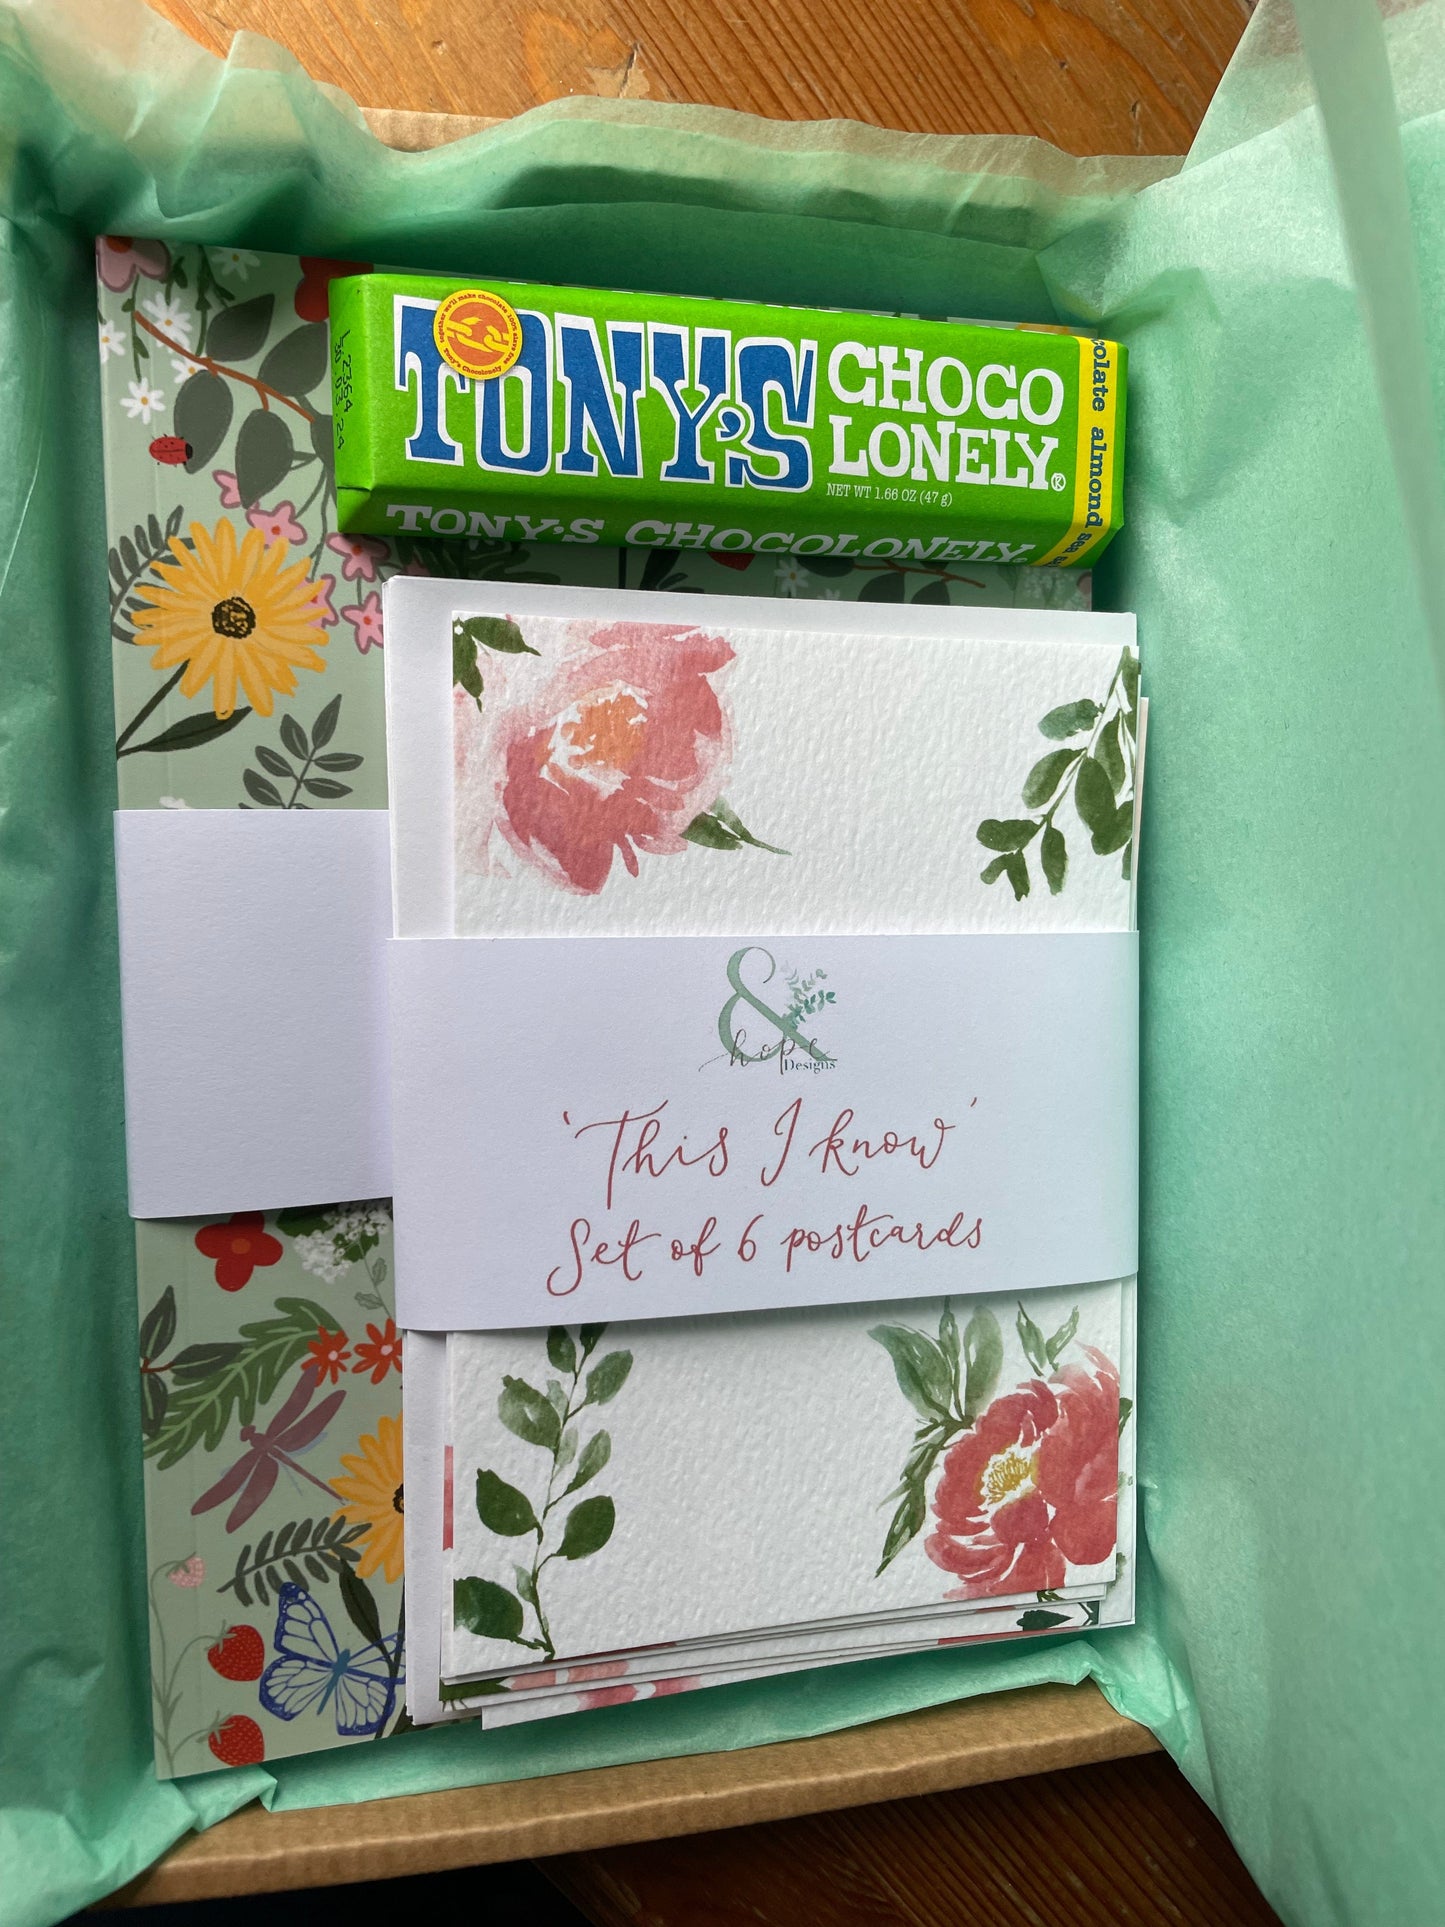 Letterbox gift with Christian journal Card number - specify And Hope Designs Letterbox Gift